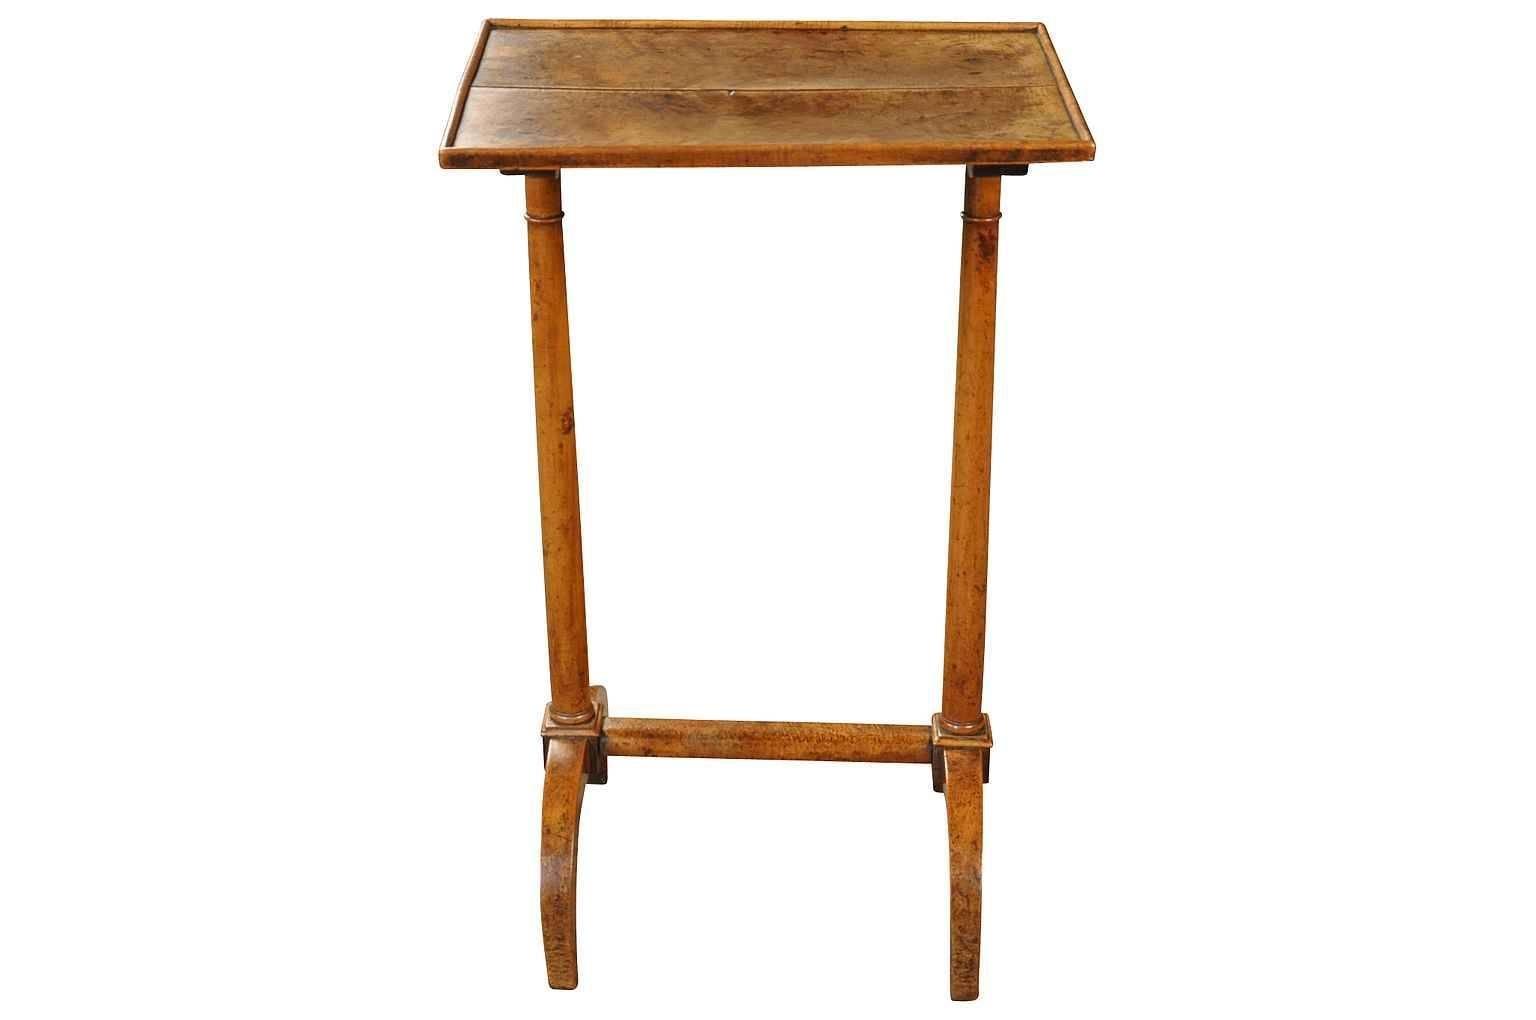 A very charming French Directoire period side table is walnut. Beautifully constructed with columnar legs ending in tapered curving feet. The graining is wonderful and the patina very rich and luminous.